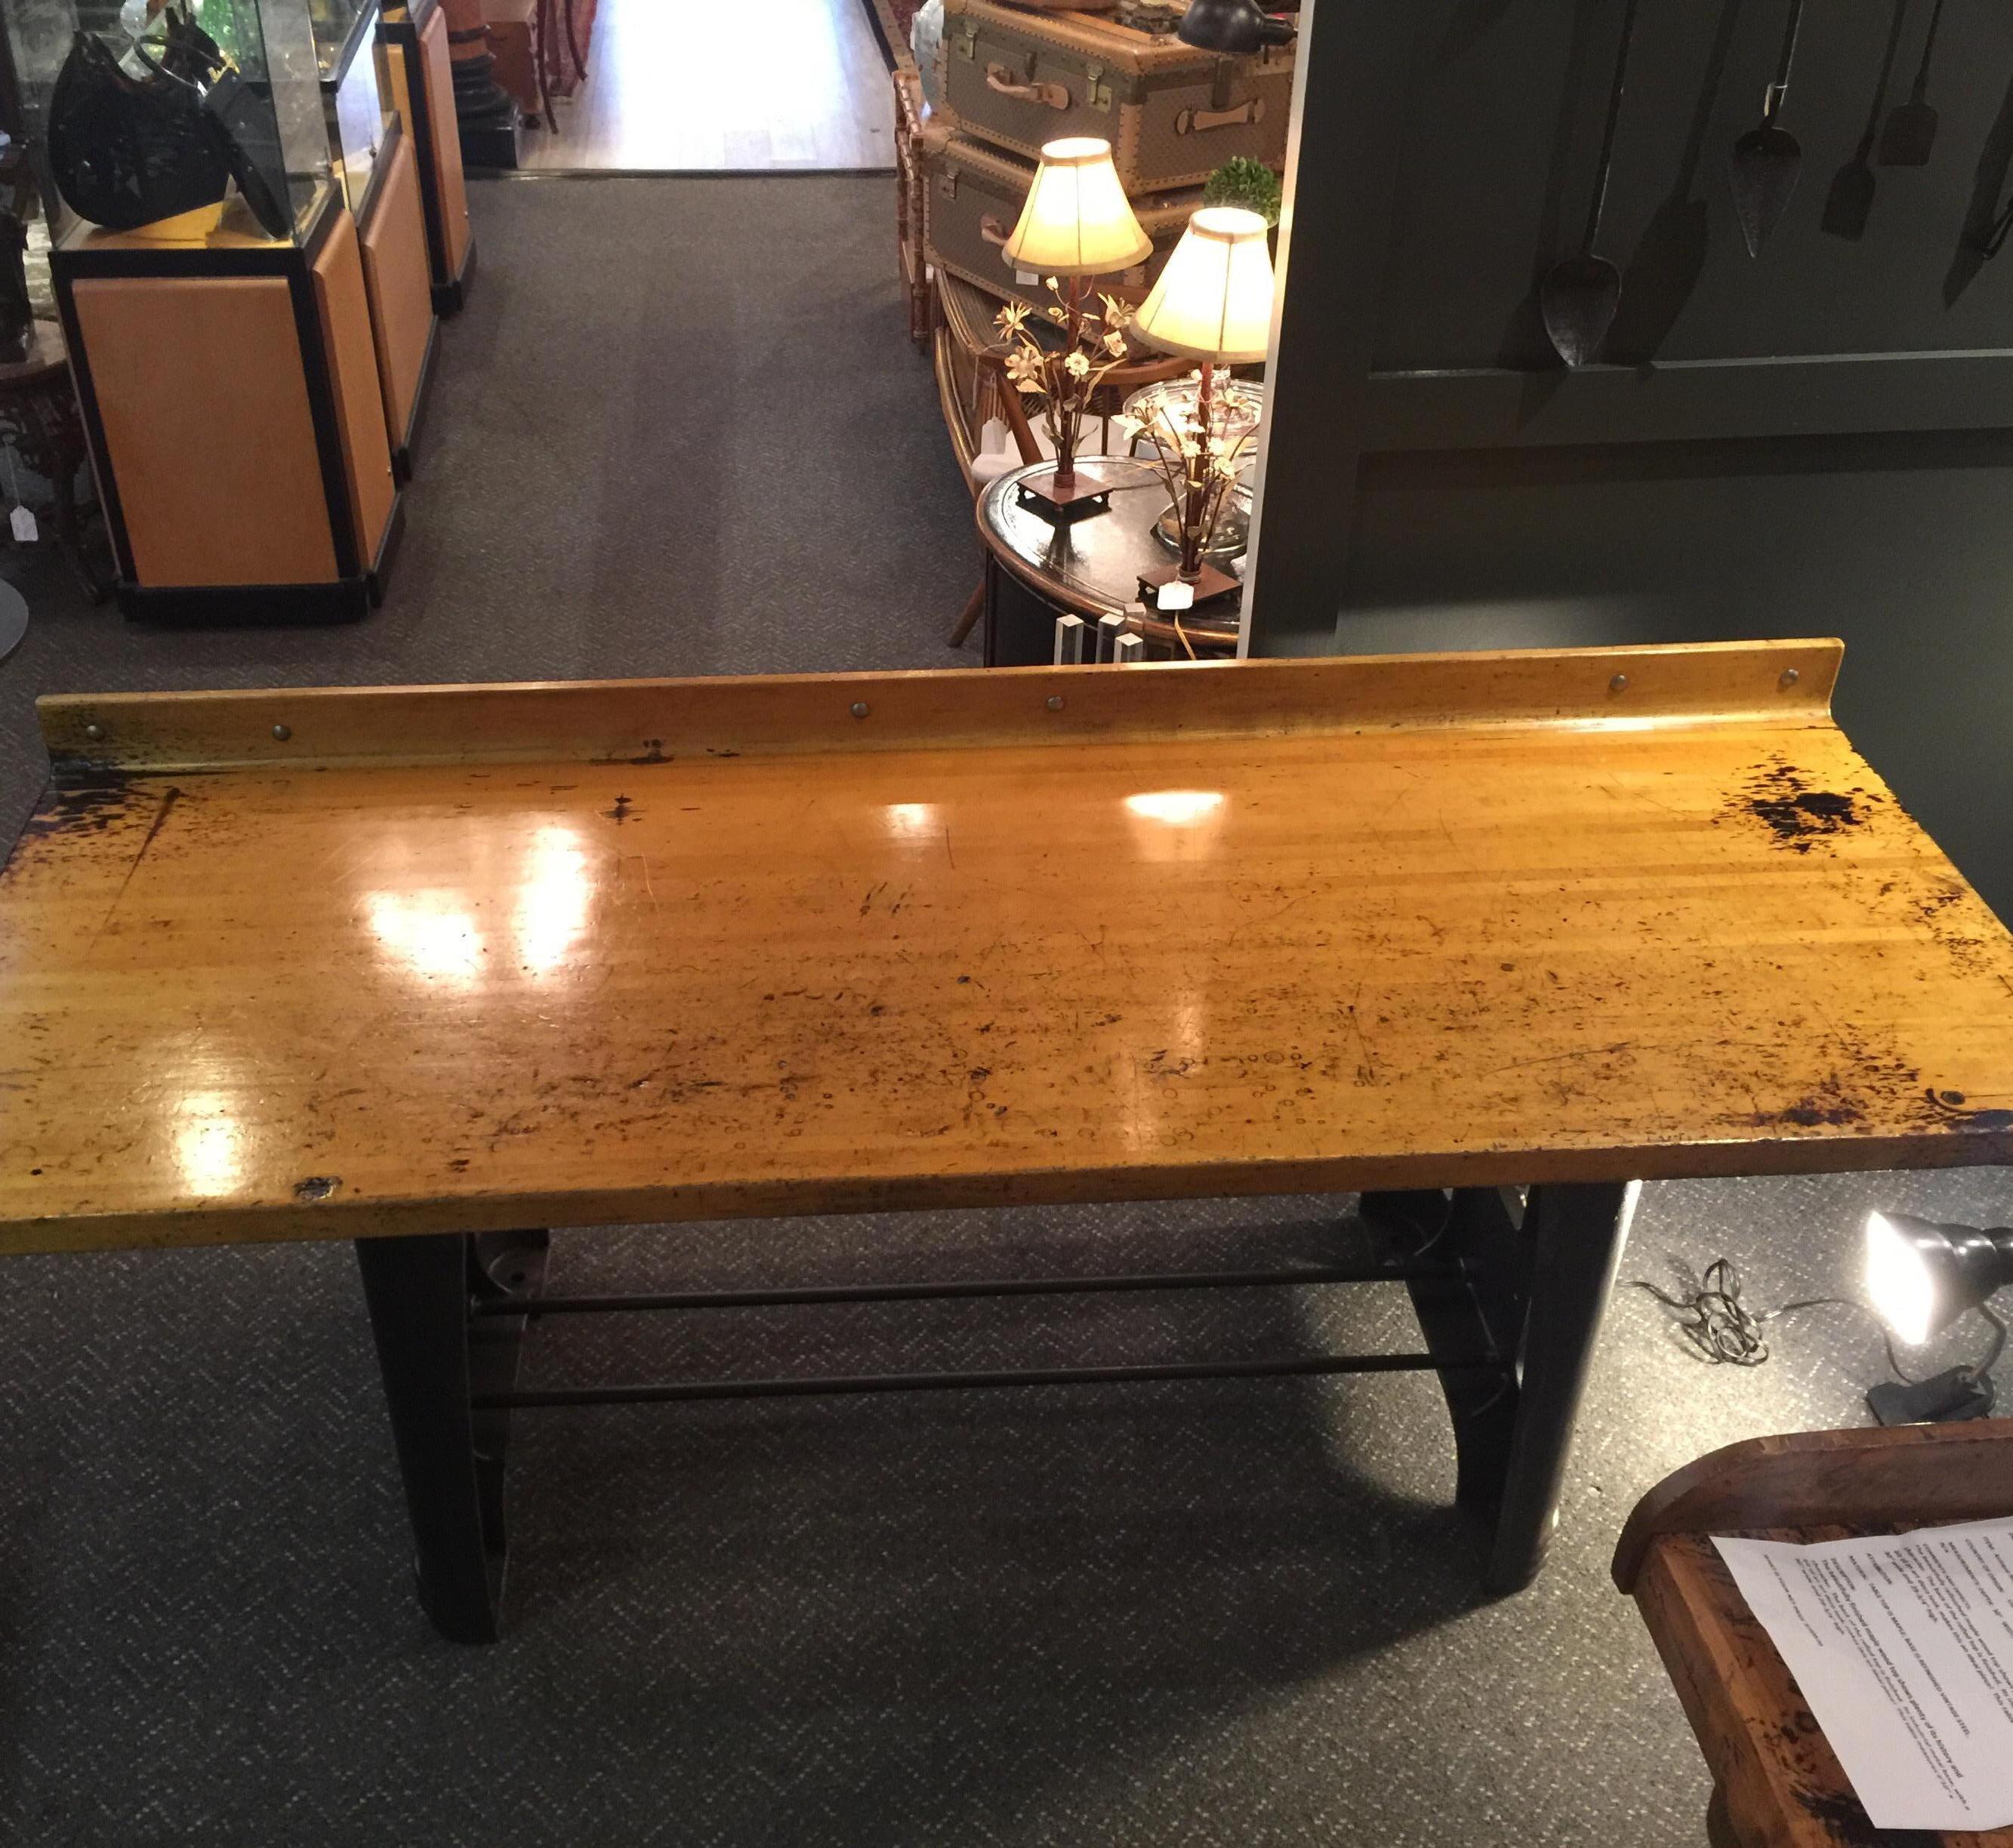 Maple table with refinished vintage steel base, Industrial style, circa mid-1900s
The beautifully refinished maple wood top shows plenty of its history and character. The back of the rolled top is finished. Its Industrial metal base, with a bit of